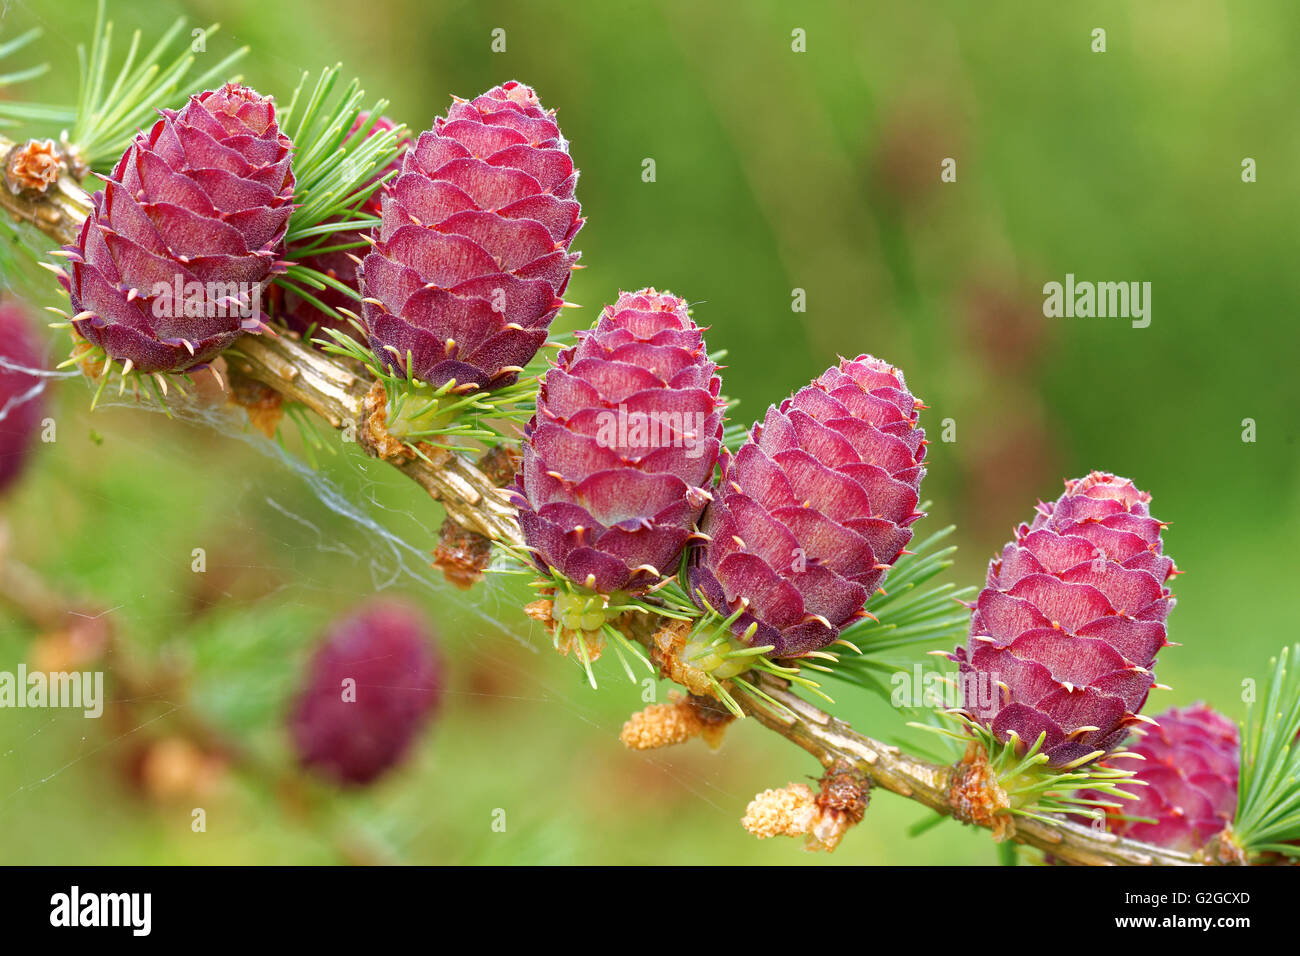 Ovulate cones and pollen cones of larch tree in spring, end of May. Stock Photo